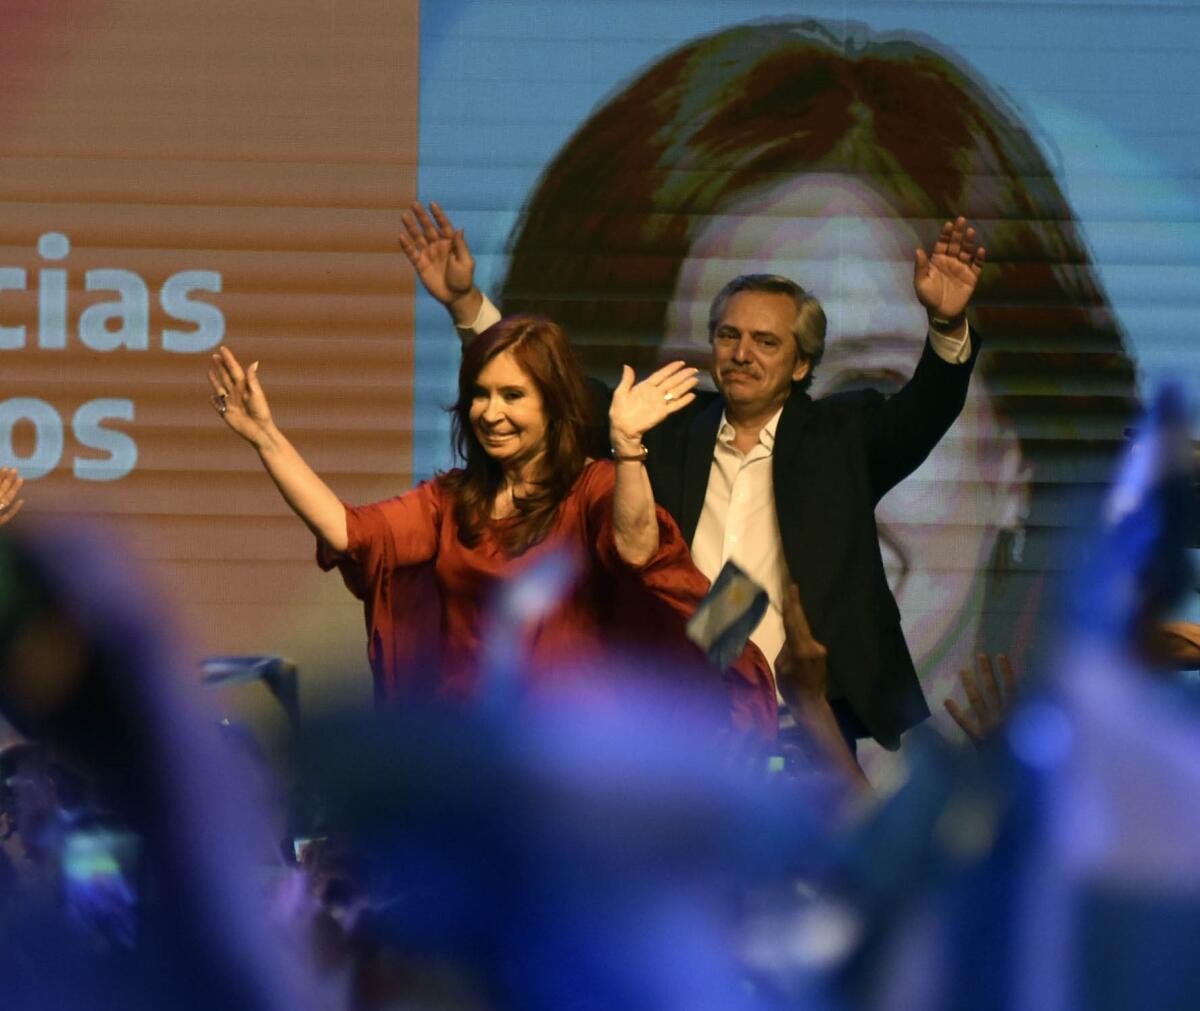 The newly elected Argentinian President Alberto Fernandez and his vice president, Cristina Fernández, celebrate the victory Oct. 28 in the general elections in Buenos Aires.